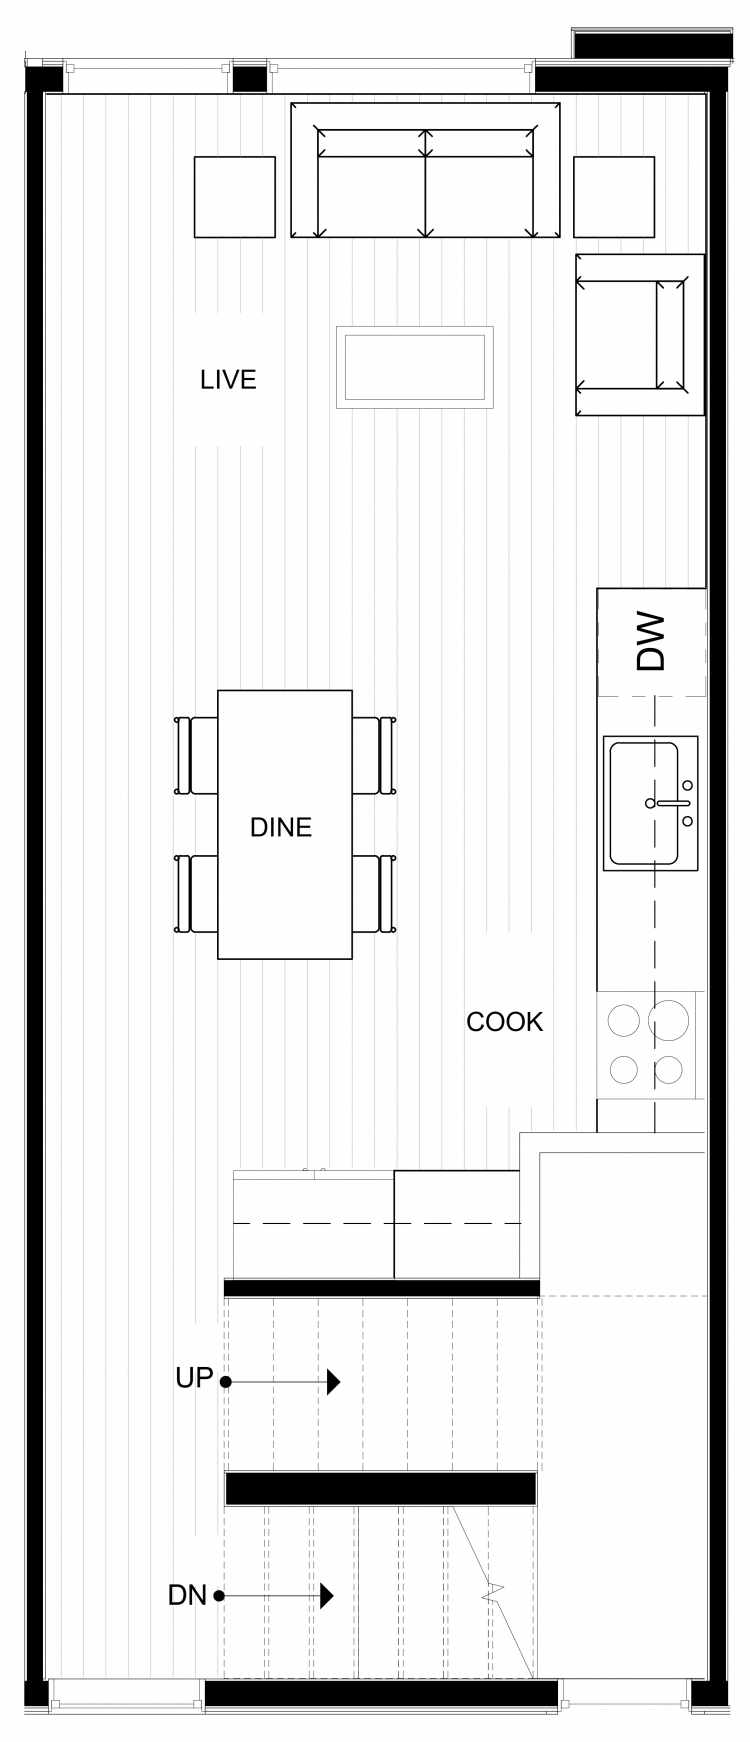 Third Floor Plan of 1541 Grandview Pl E, One of the Grandview Townhomes in Capitol Hill